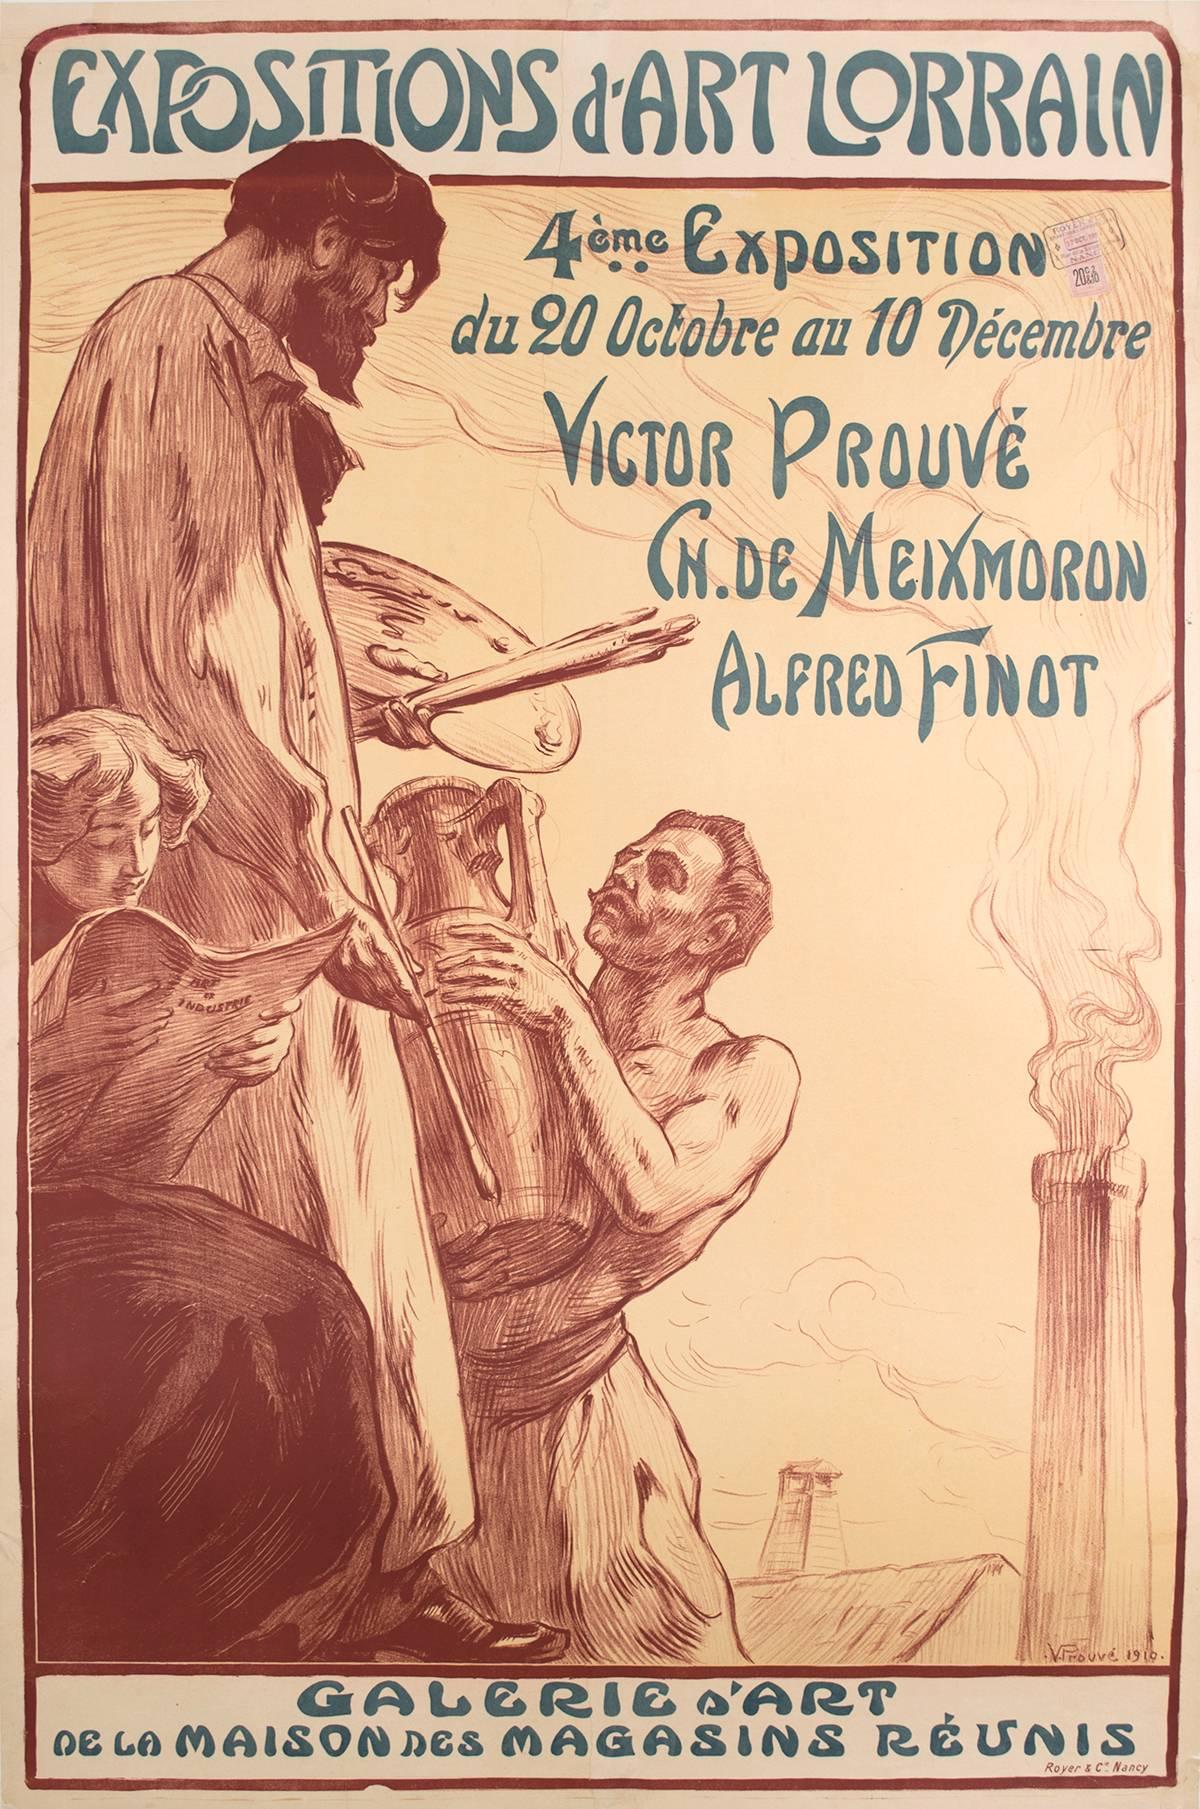 Early 20th Century French poster by Victor Prove, 1910. This is an advertisement for an art exhibition in Lorrain which included works by the artist.

Prouve (1858-1943) was a painter, sculptor and engraver of the Ecole de Nancy, which spearheaded